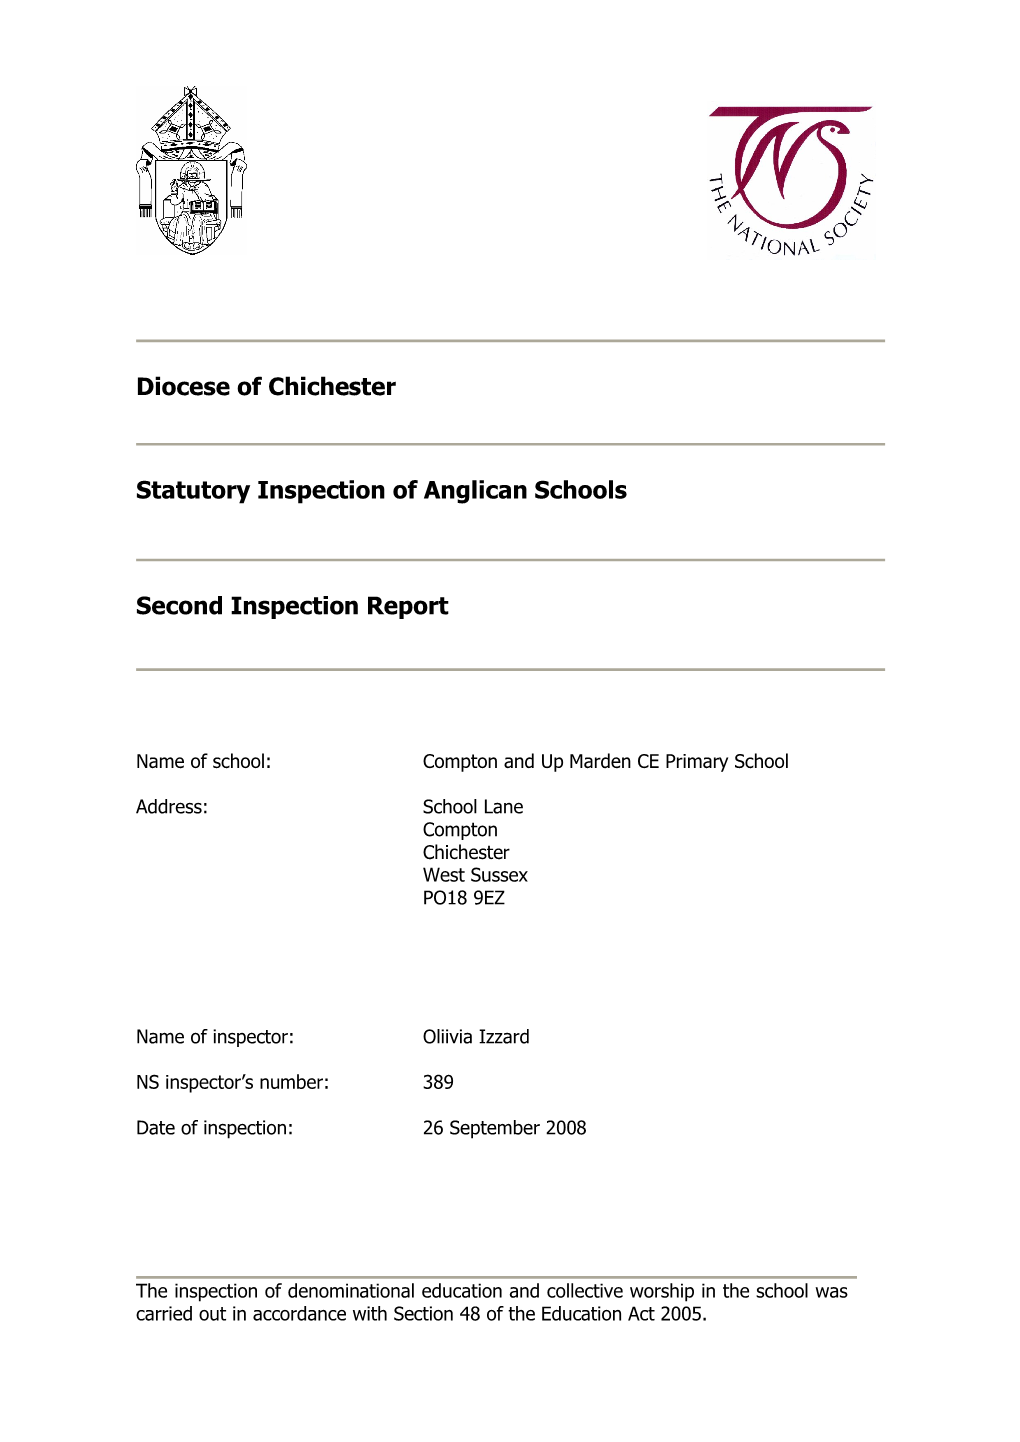 Diocese of Chichester Statutory Inspection of Anglican Schools